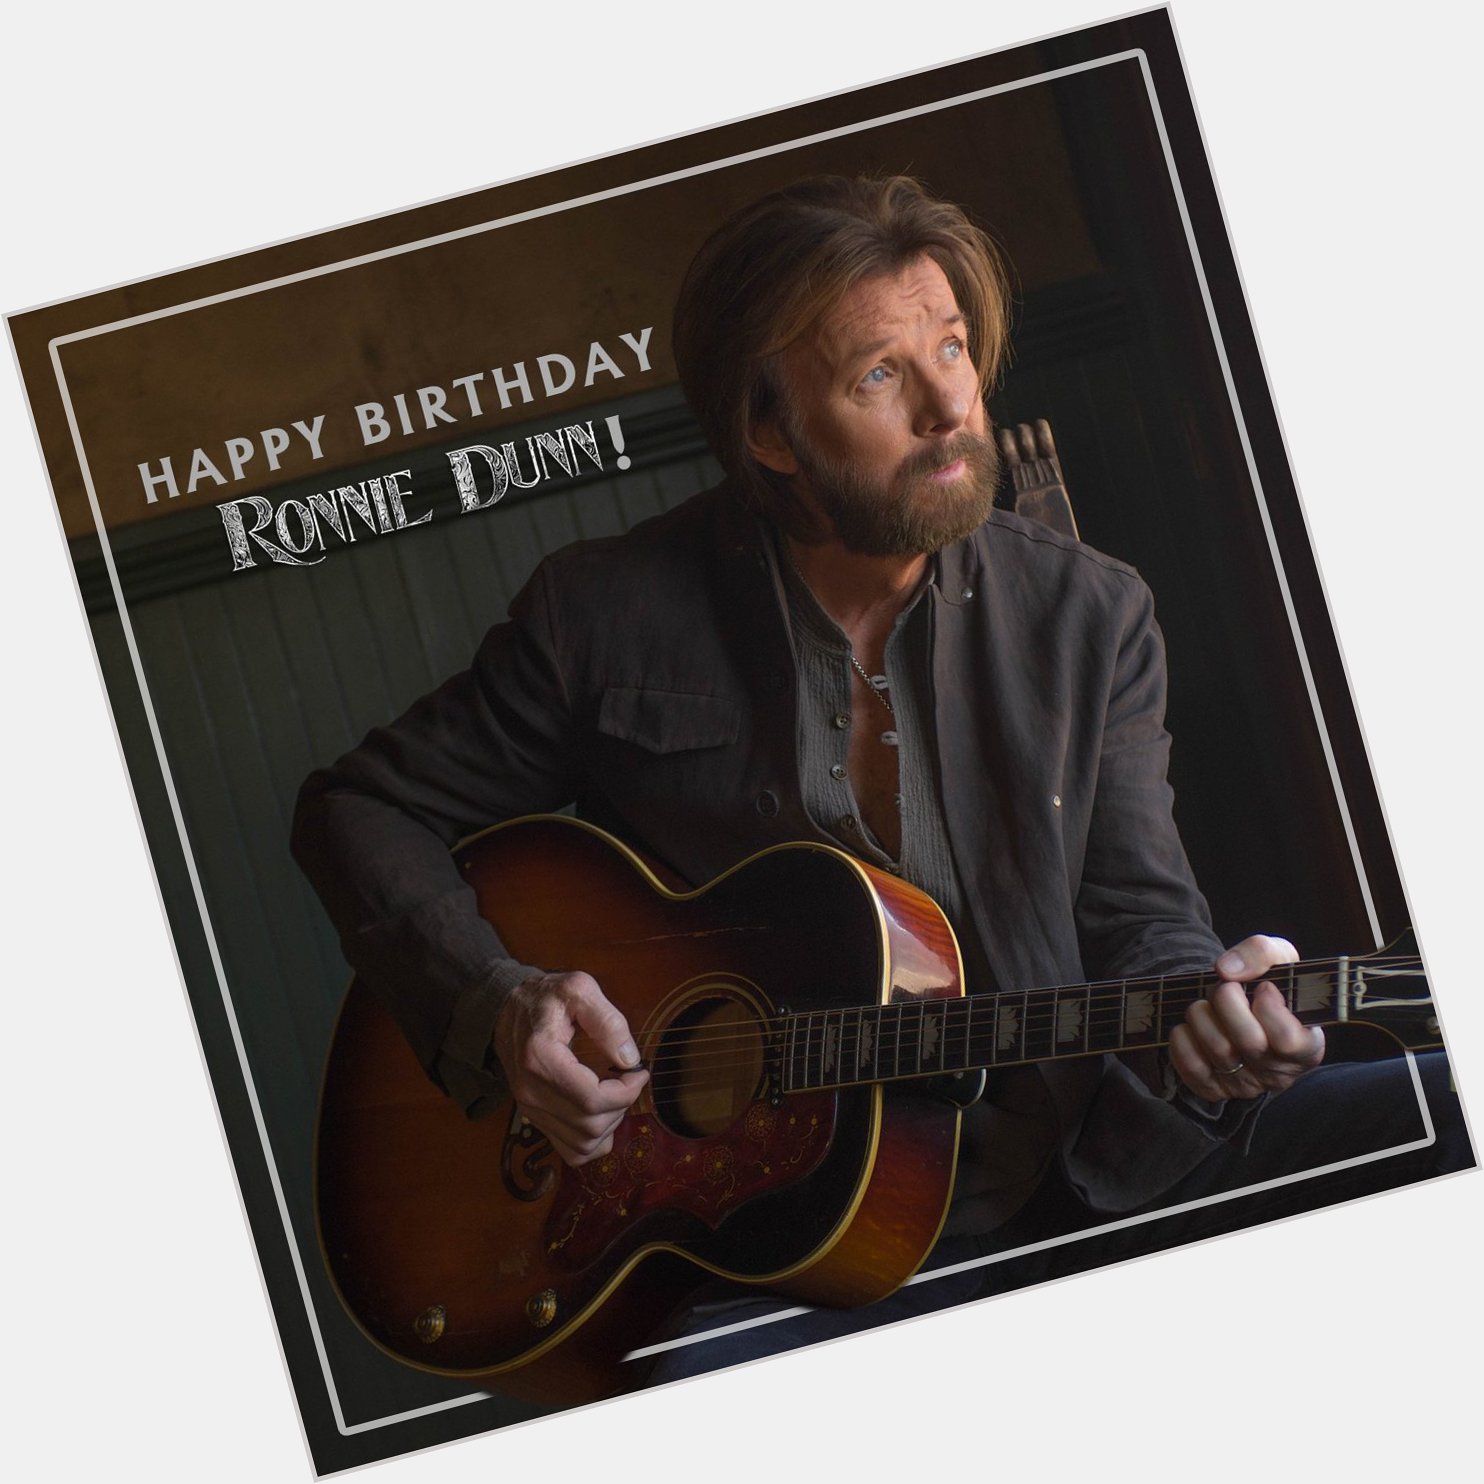 Please join us in wishing Ronnie Dunn a very Happy Birthday! 